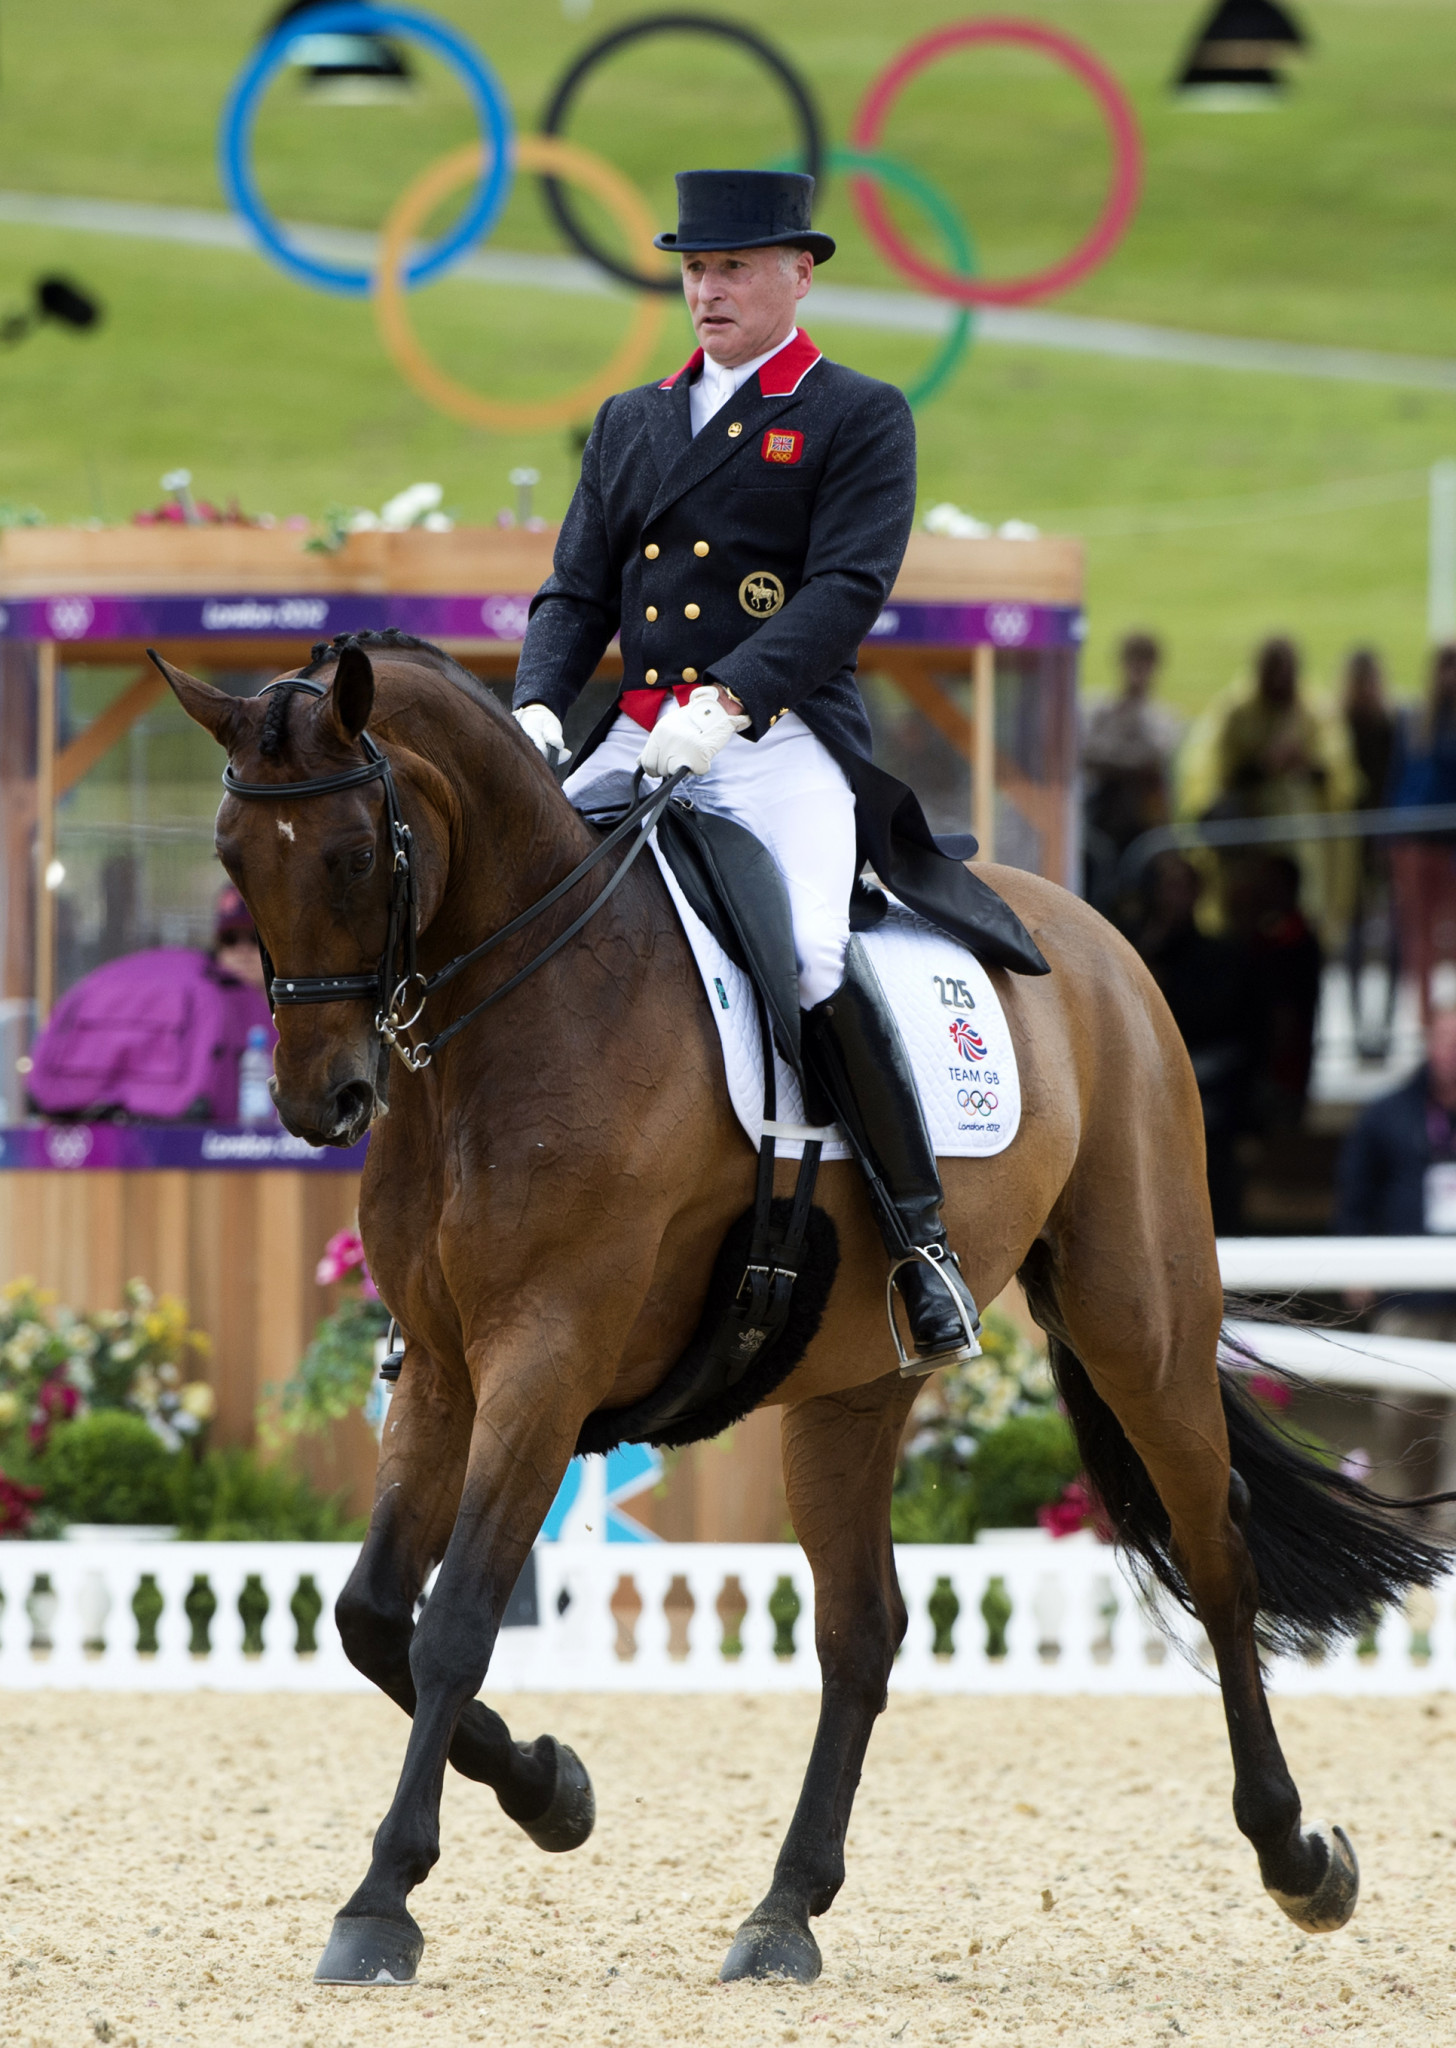 Britain's 64-year-old triple Olympian Richard Davison is among those due to compete this weekend at the FEI Dressage Nations Cup in Compiègne, France ©Getty Images